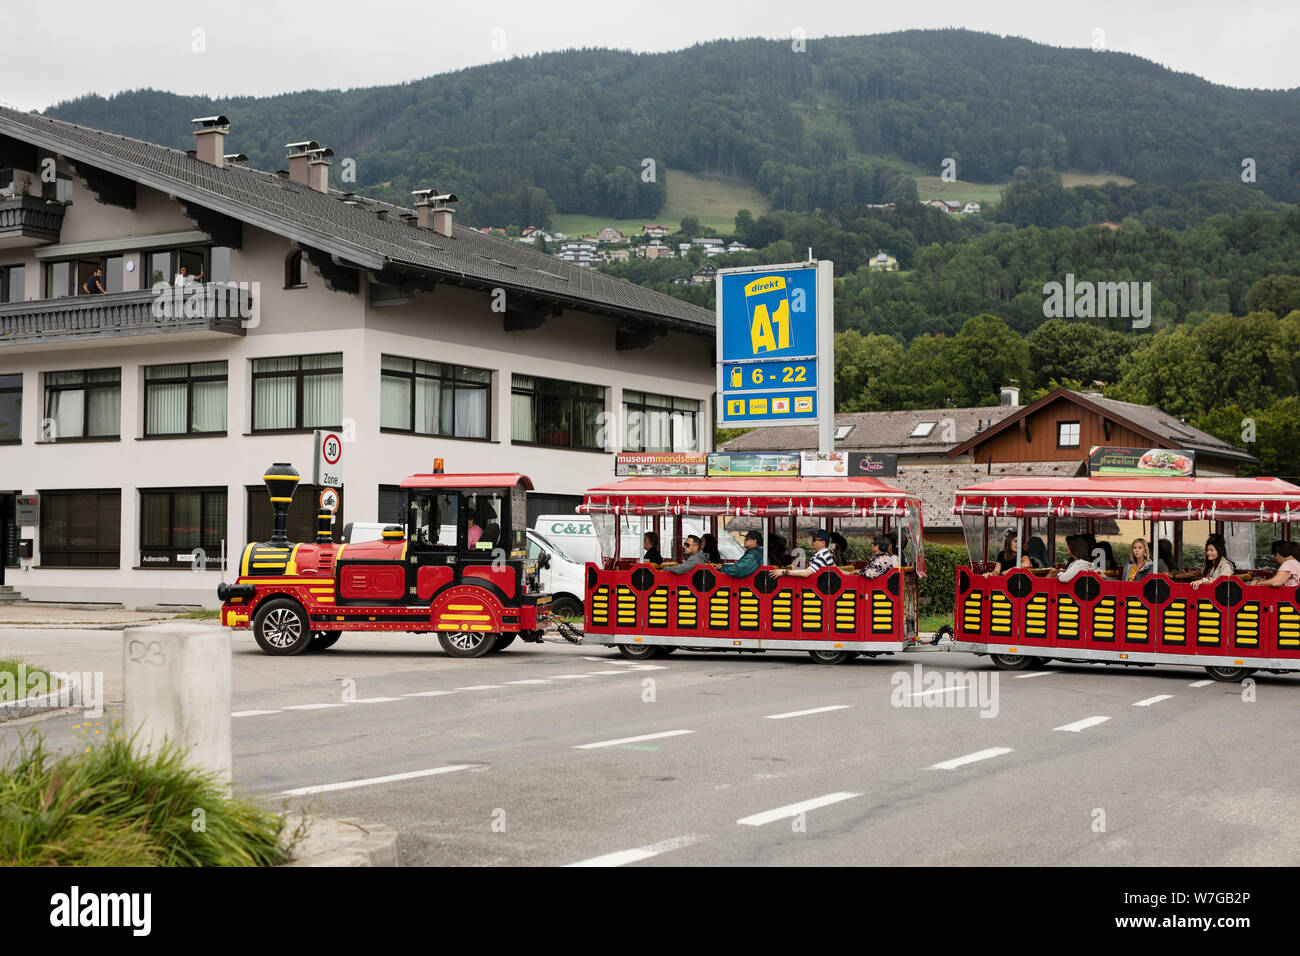 A tourist trolley transports visitors from parking lots to the center of the Alpine town of Mondsee, Austria. Stock Photo